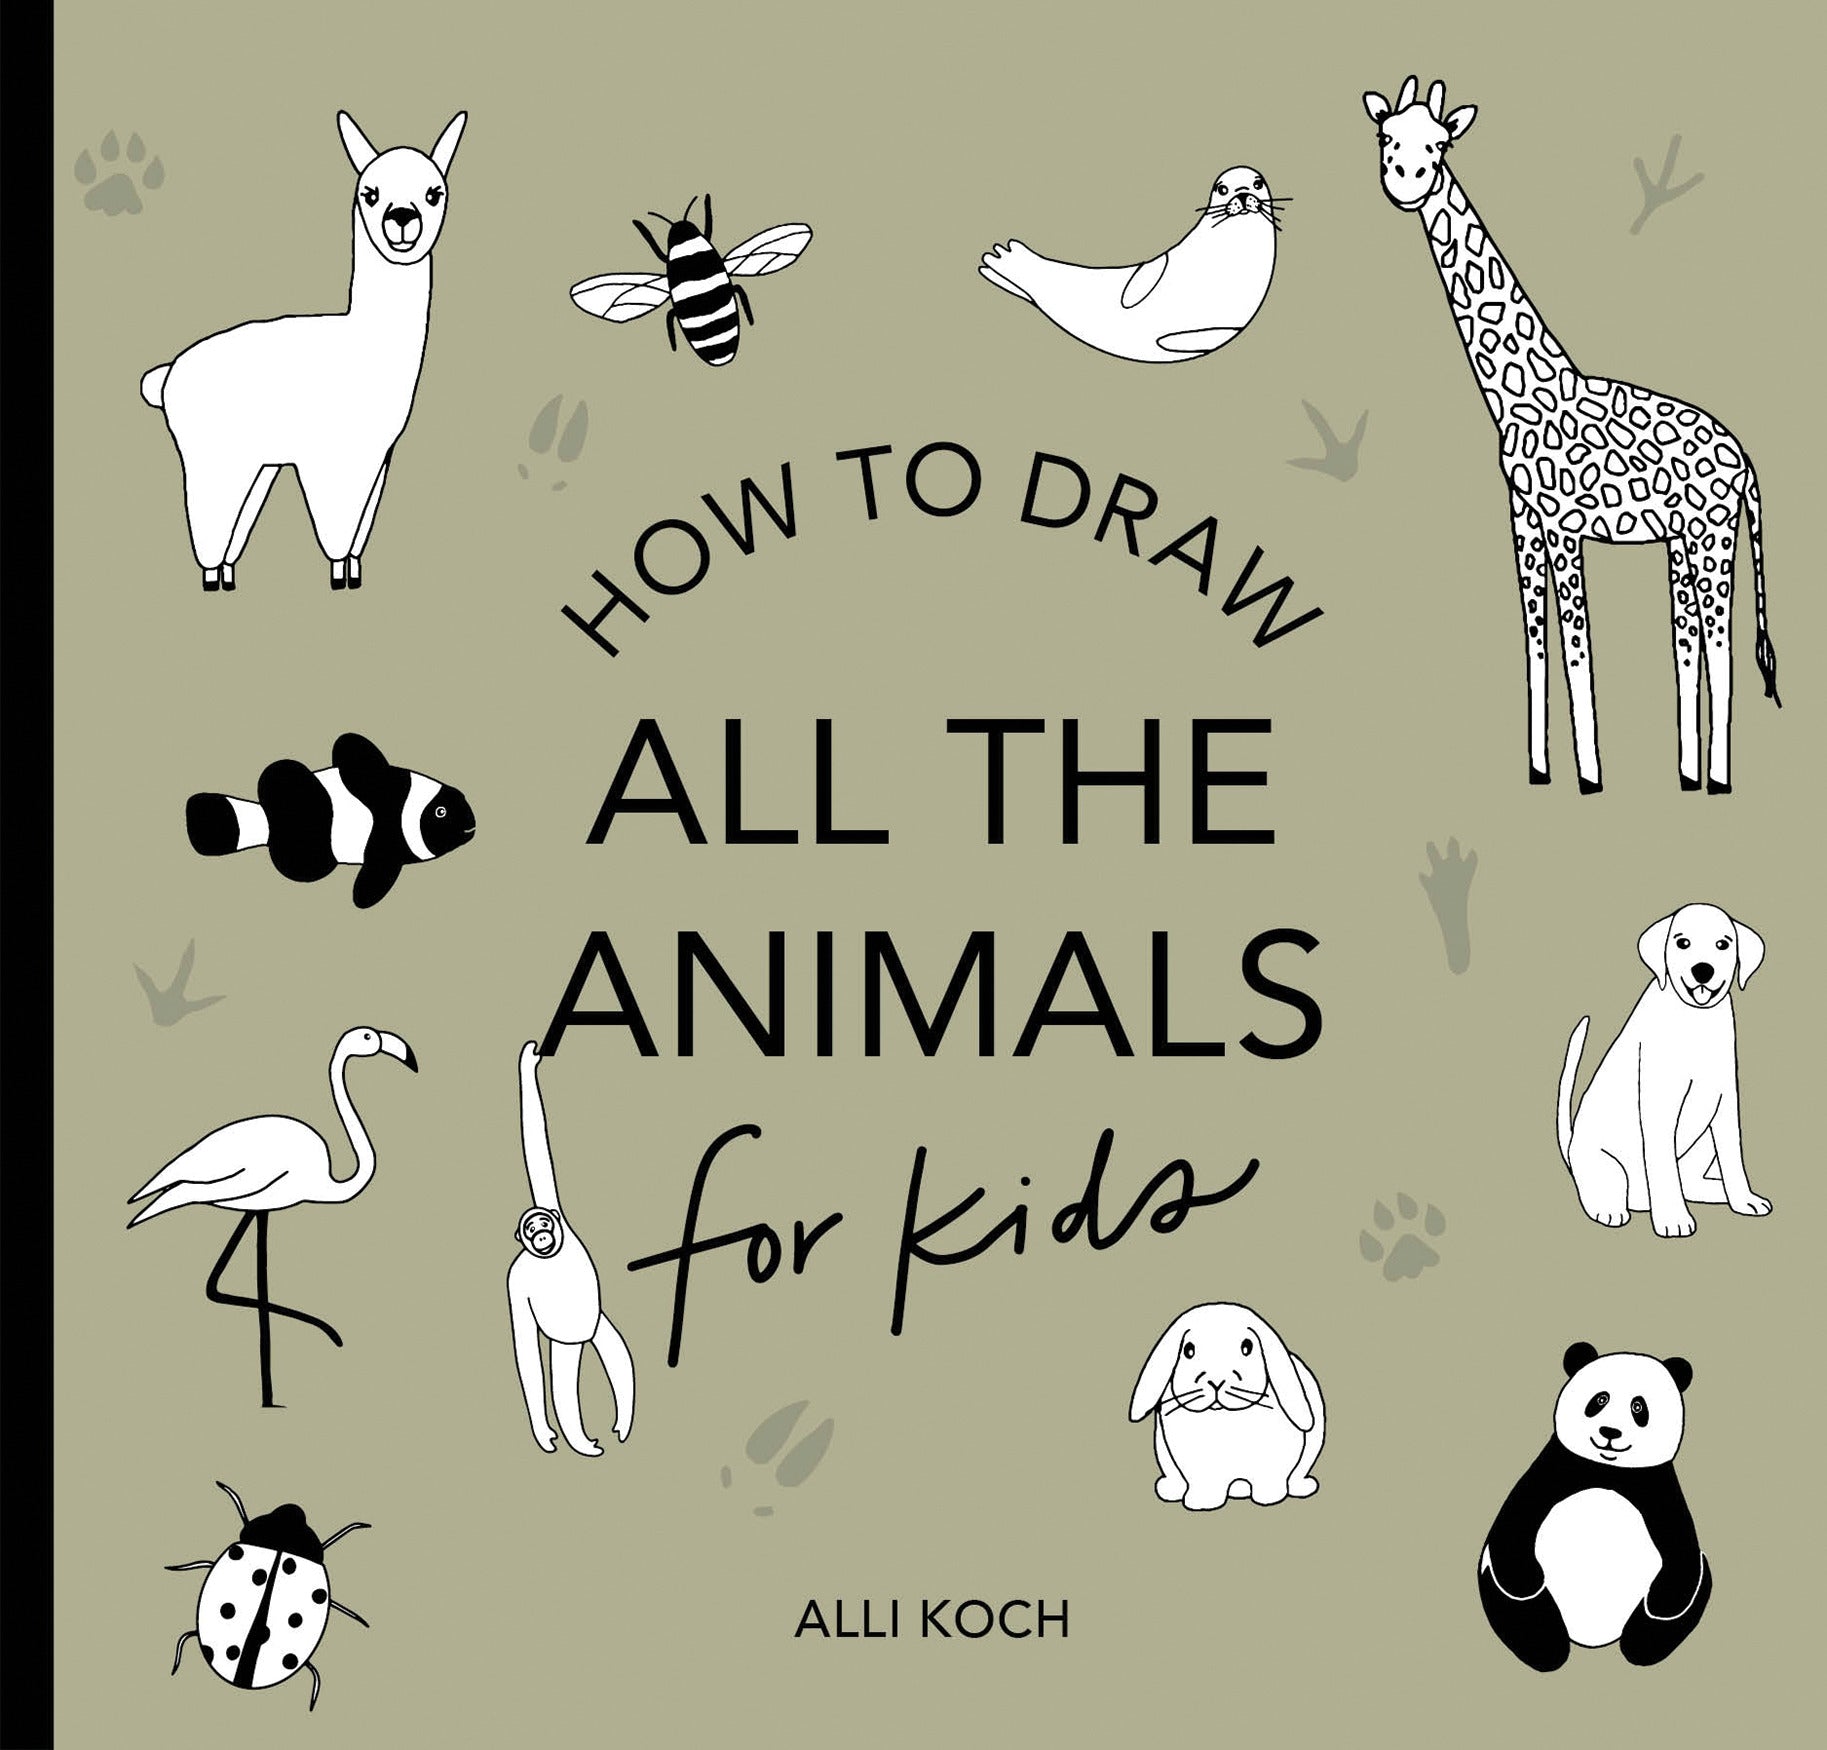 How to Draw: All the Animals - for kids